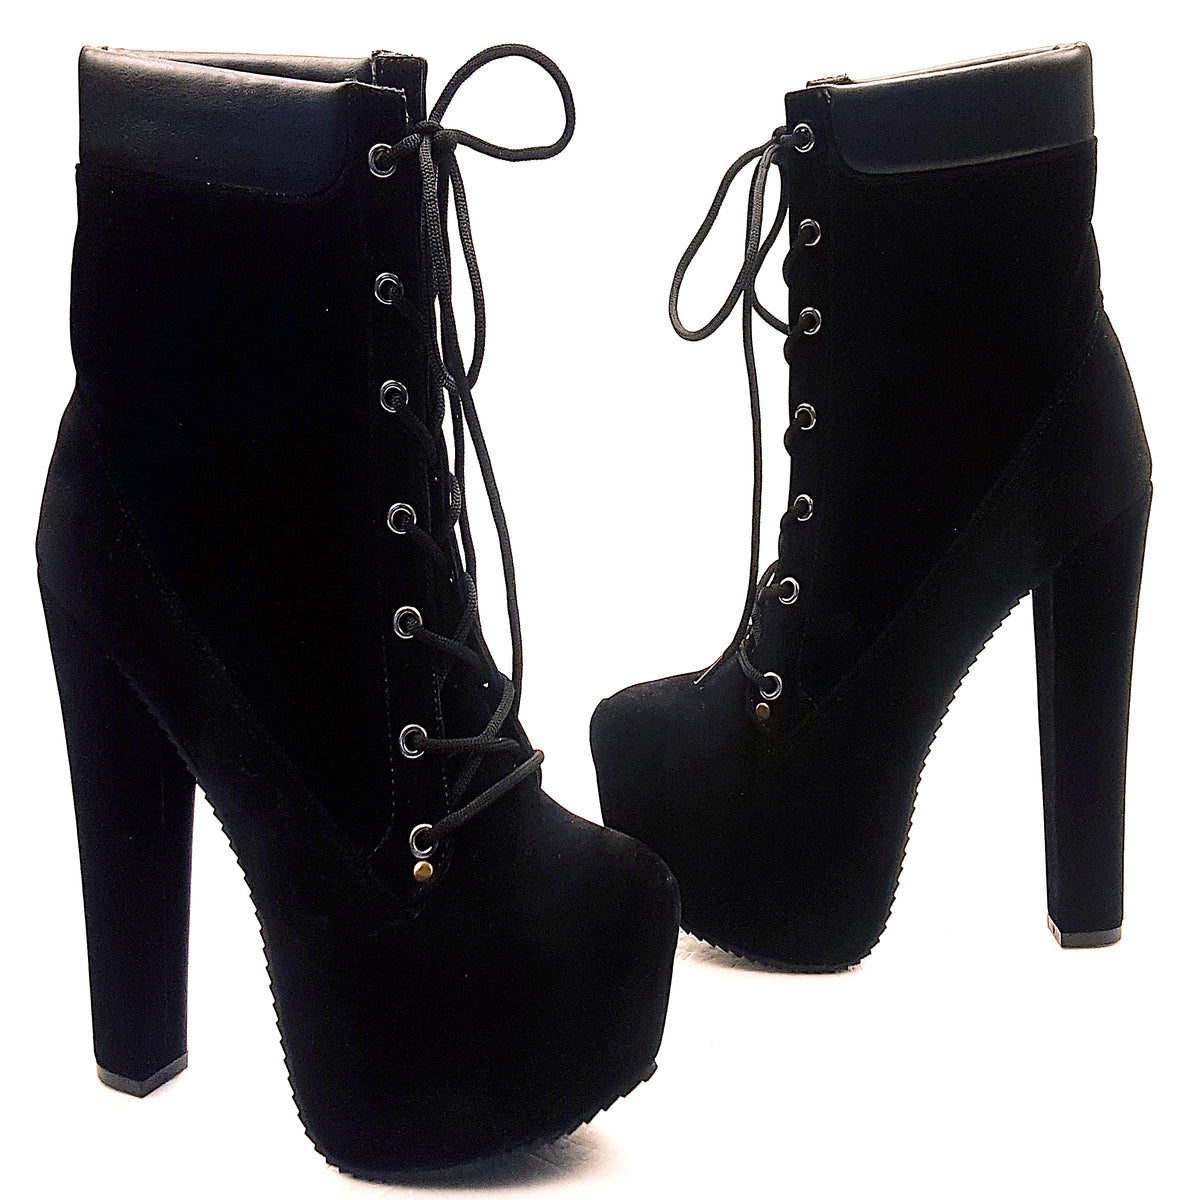 Lace Up Black Suede High Heel Boots | Tajna Club